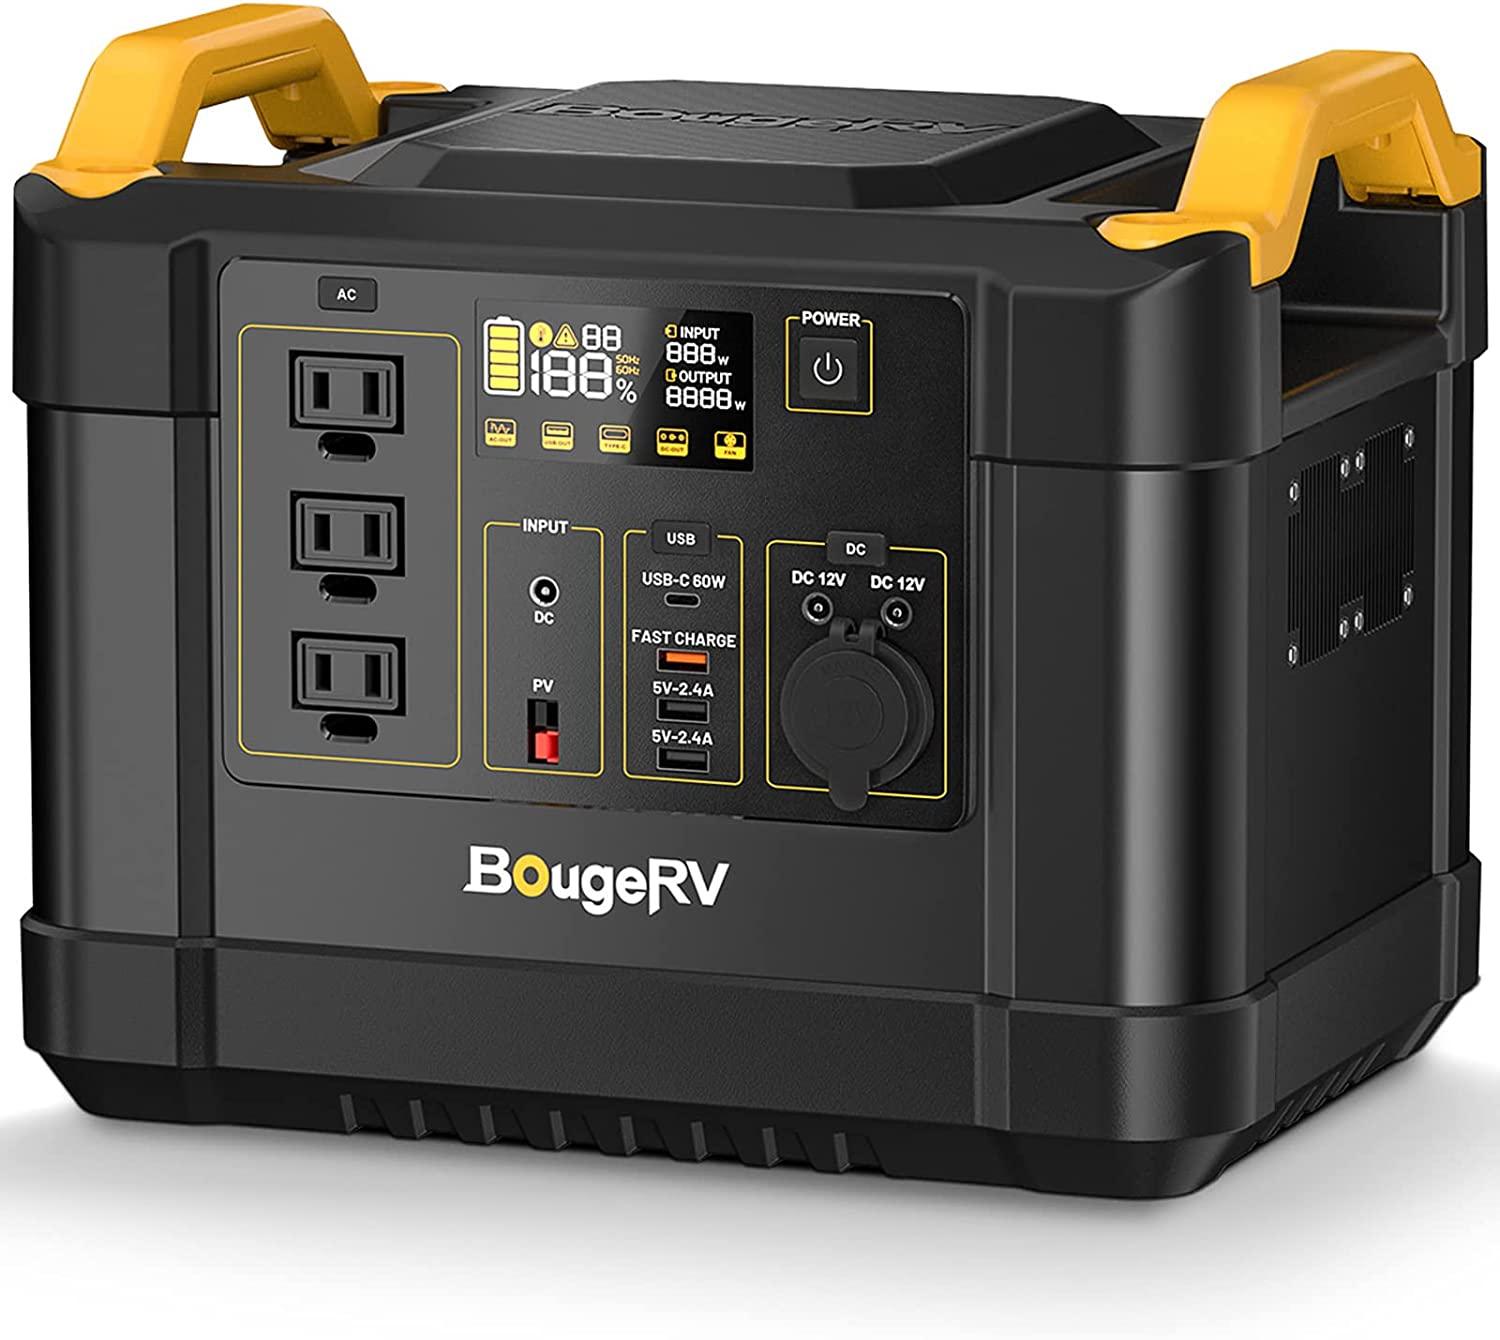 BougeRV 1120Wh LifePO4 Fort Portable Battery Backup Power Station for $599.99 Shipped